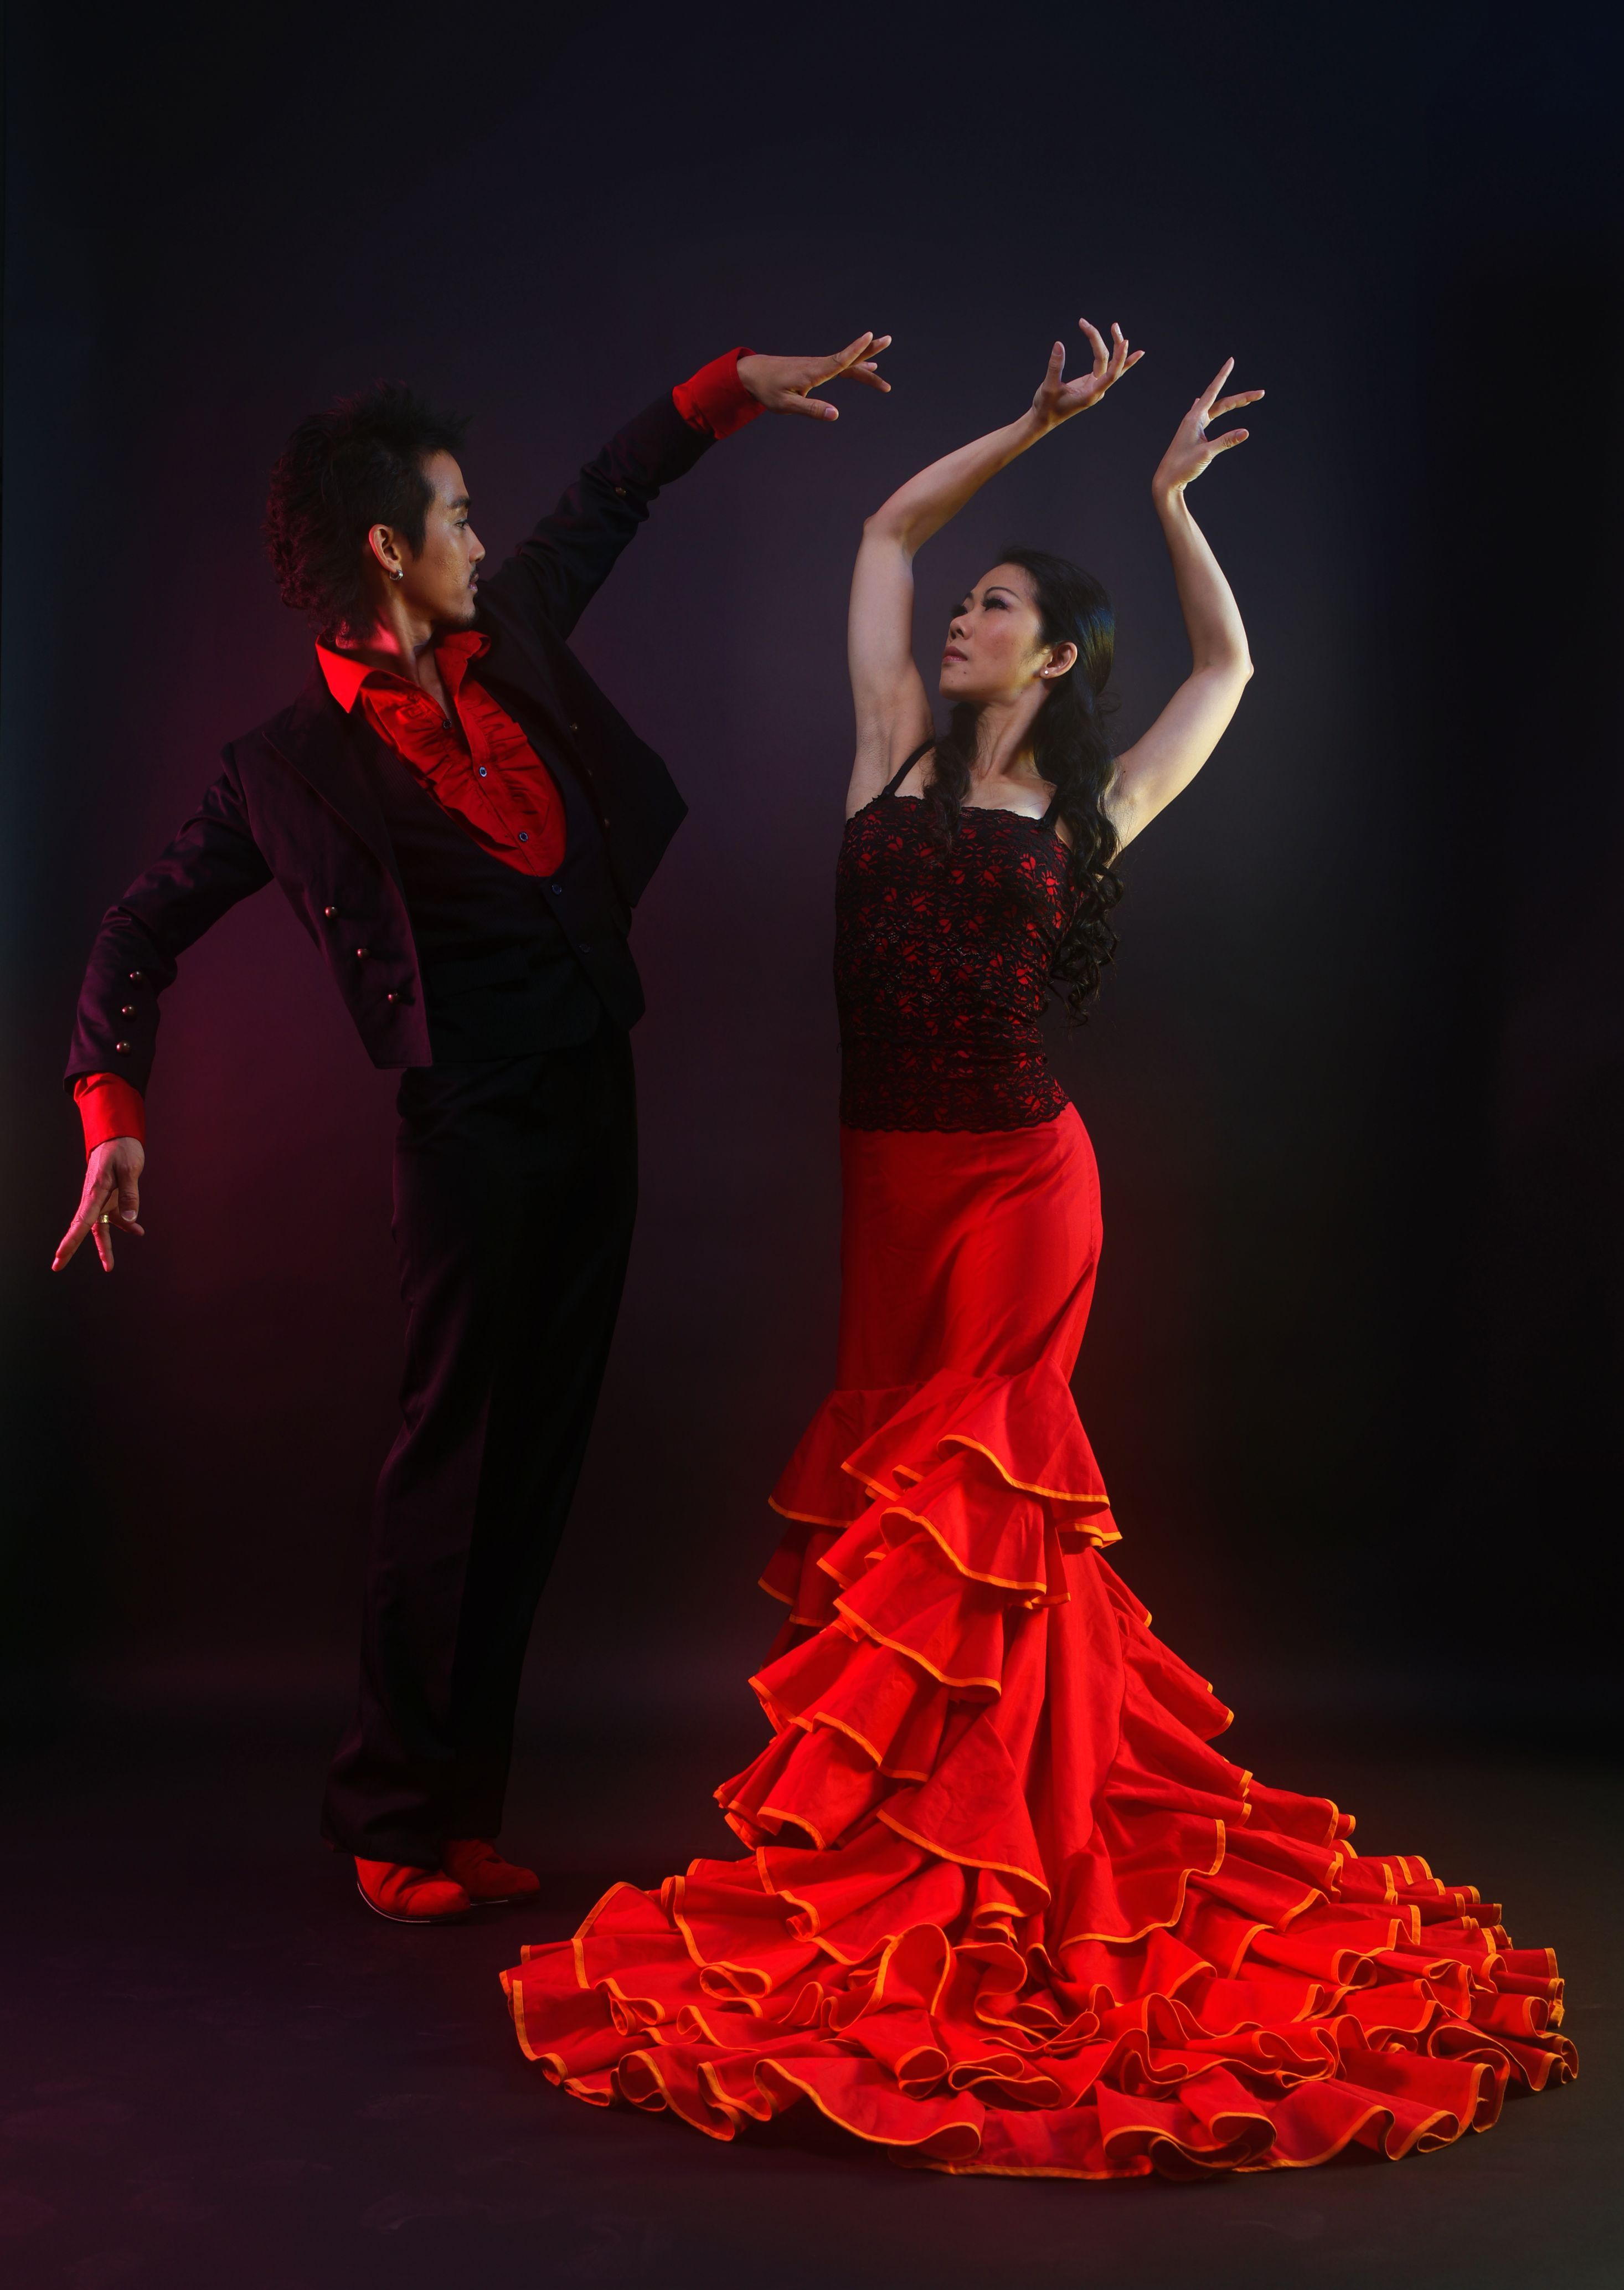 Spanish Dancing Pictures Wallpapers